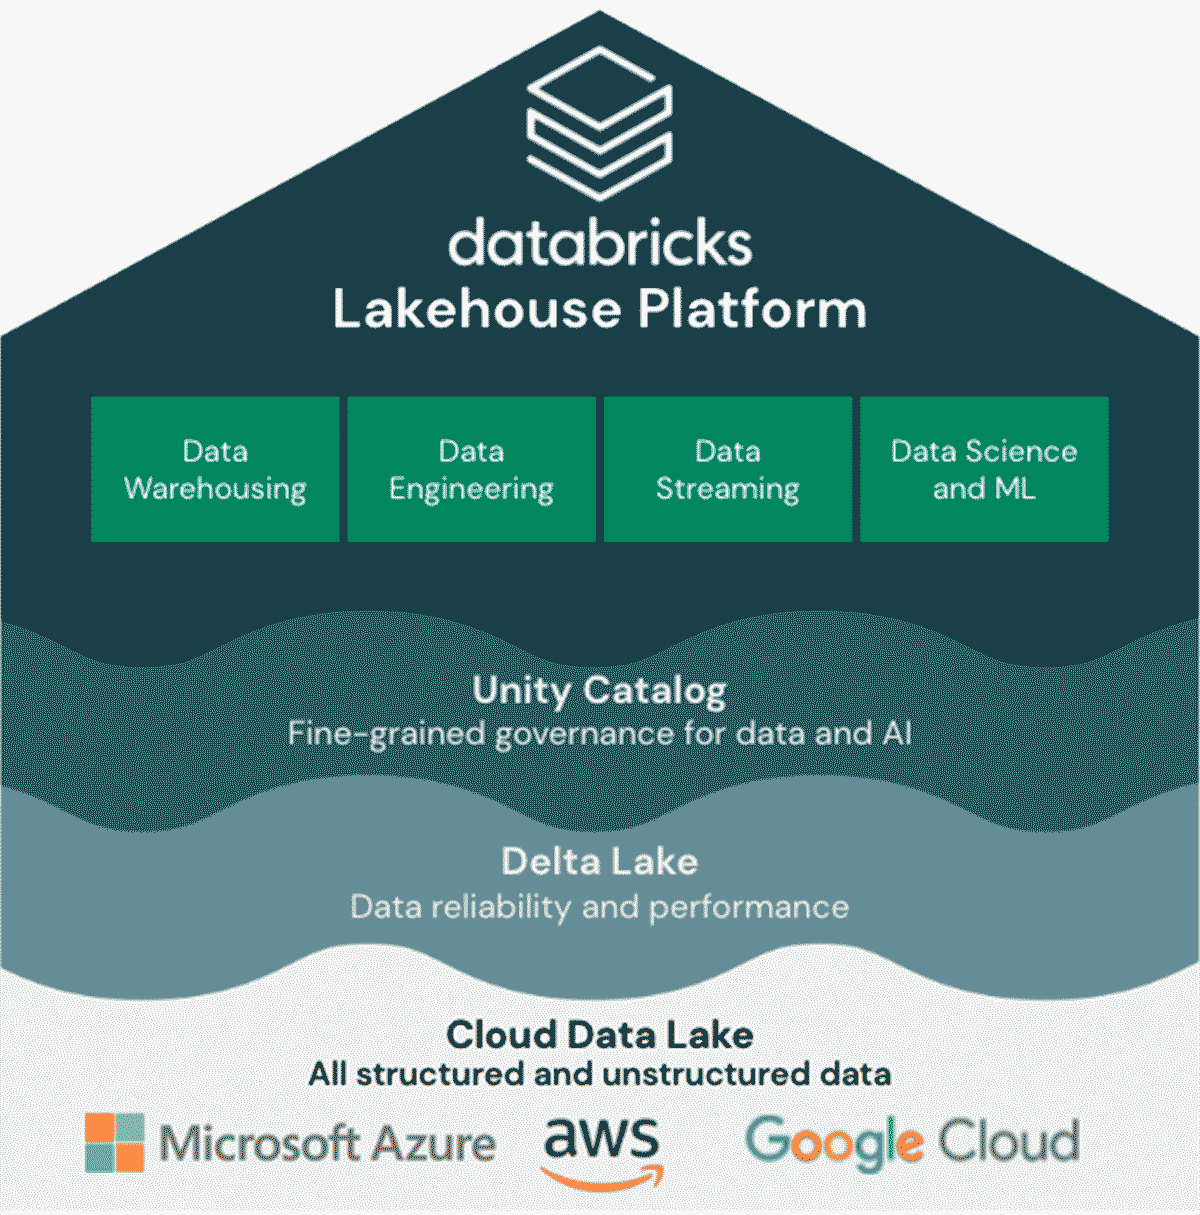 The Lakehouse Platform provides a unified approach that simplifies the modern data stack by eliminating the complexities of data warehousing, engineering, streaming and data science/machine learning use cases.